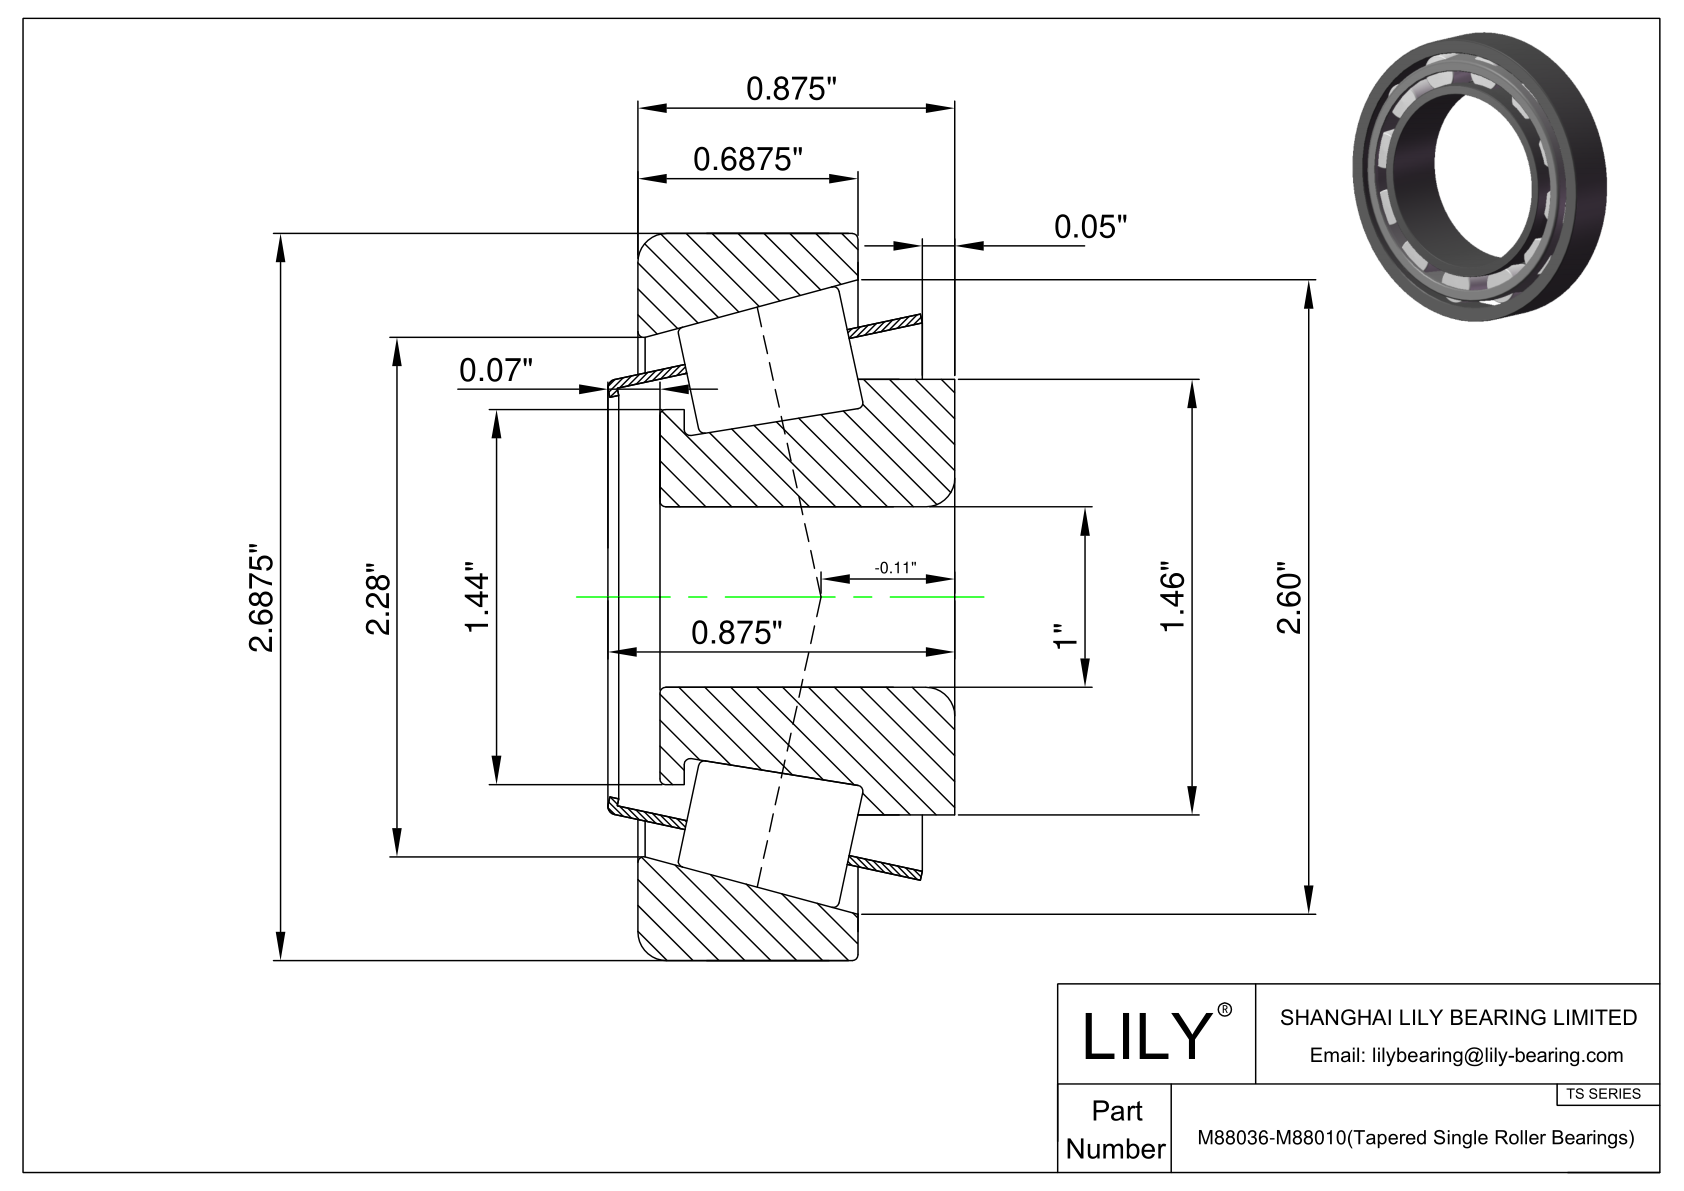 M88036-M88010 TS (Tapered Single Roller Bearings) (Imperial) cad drawing